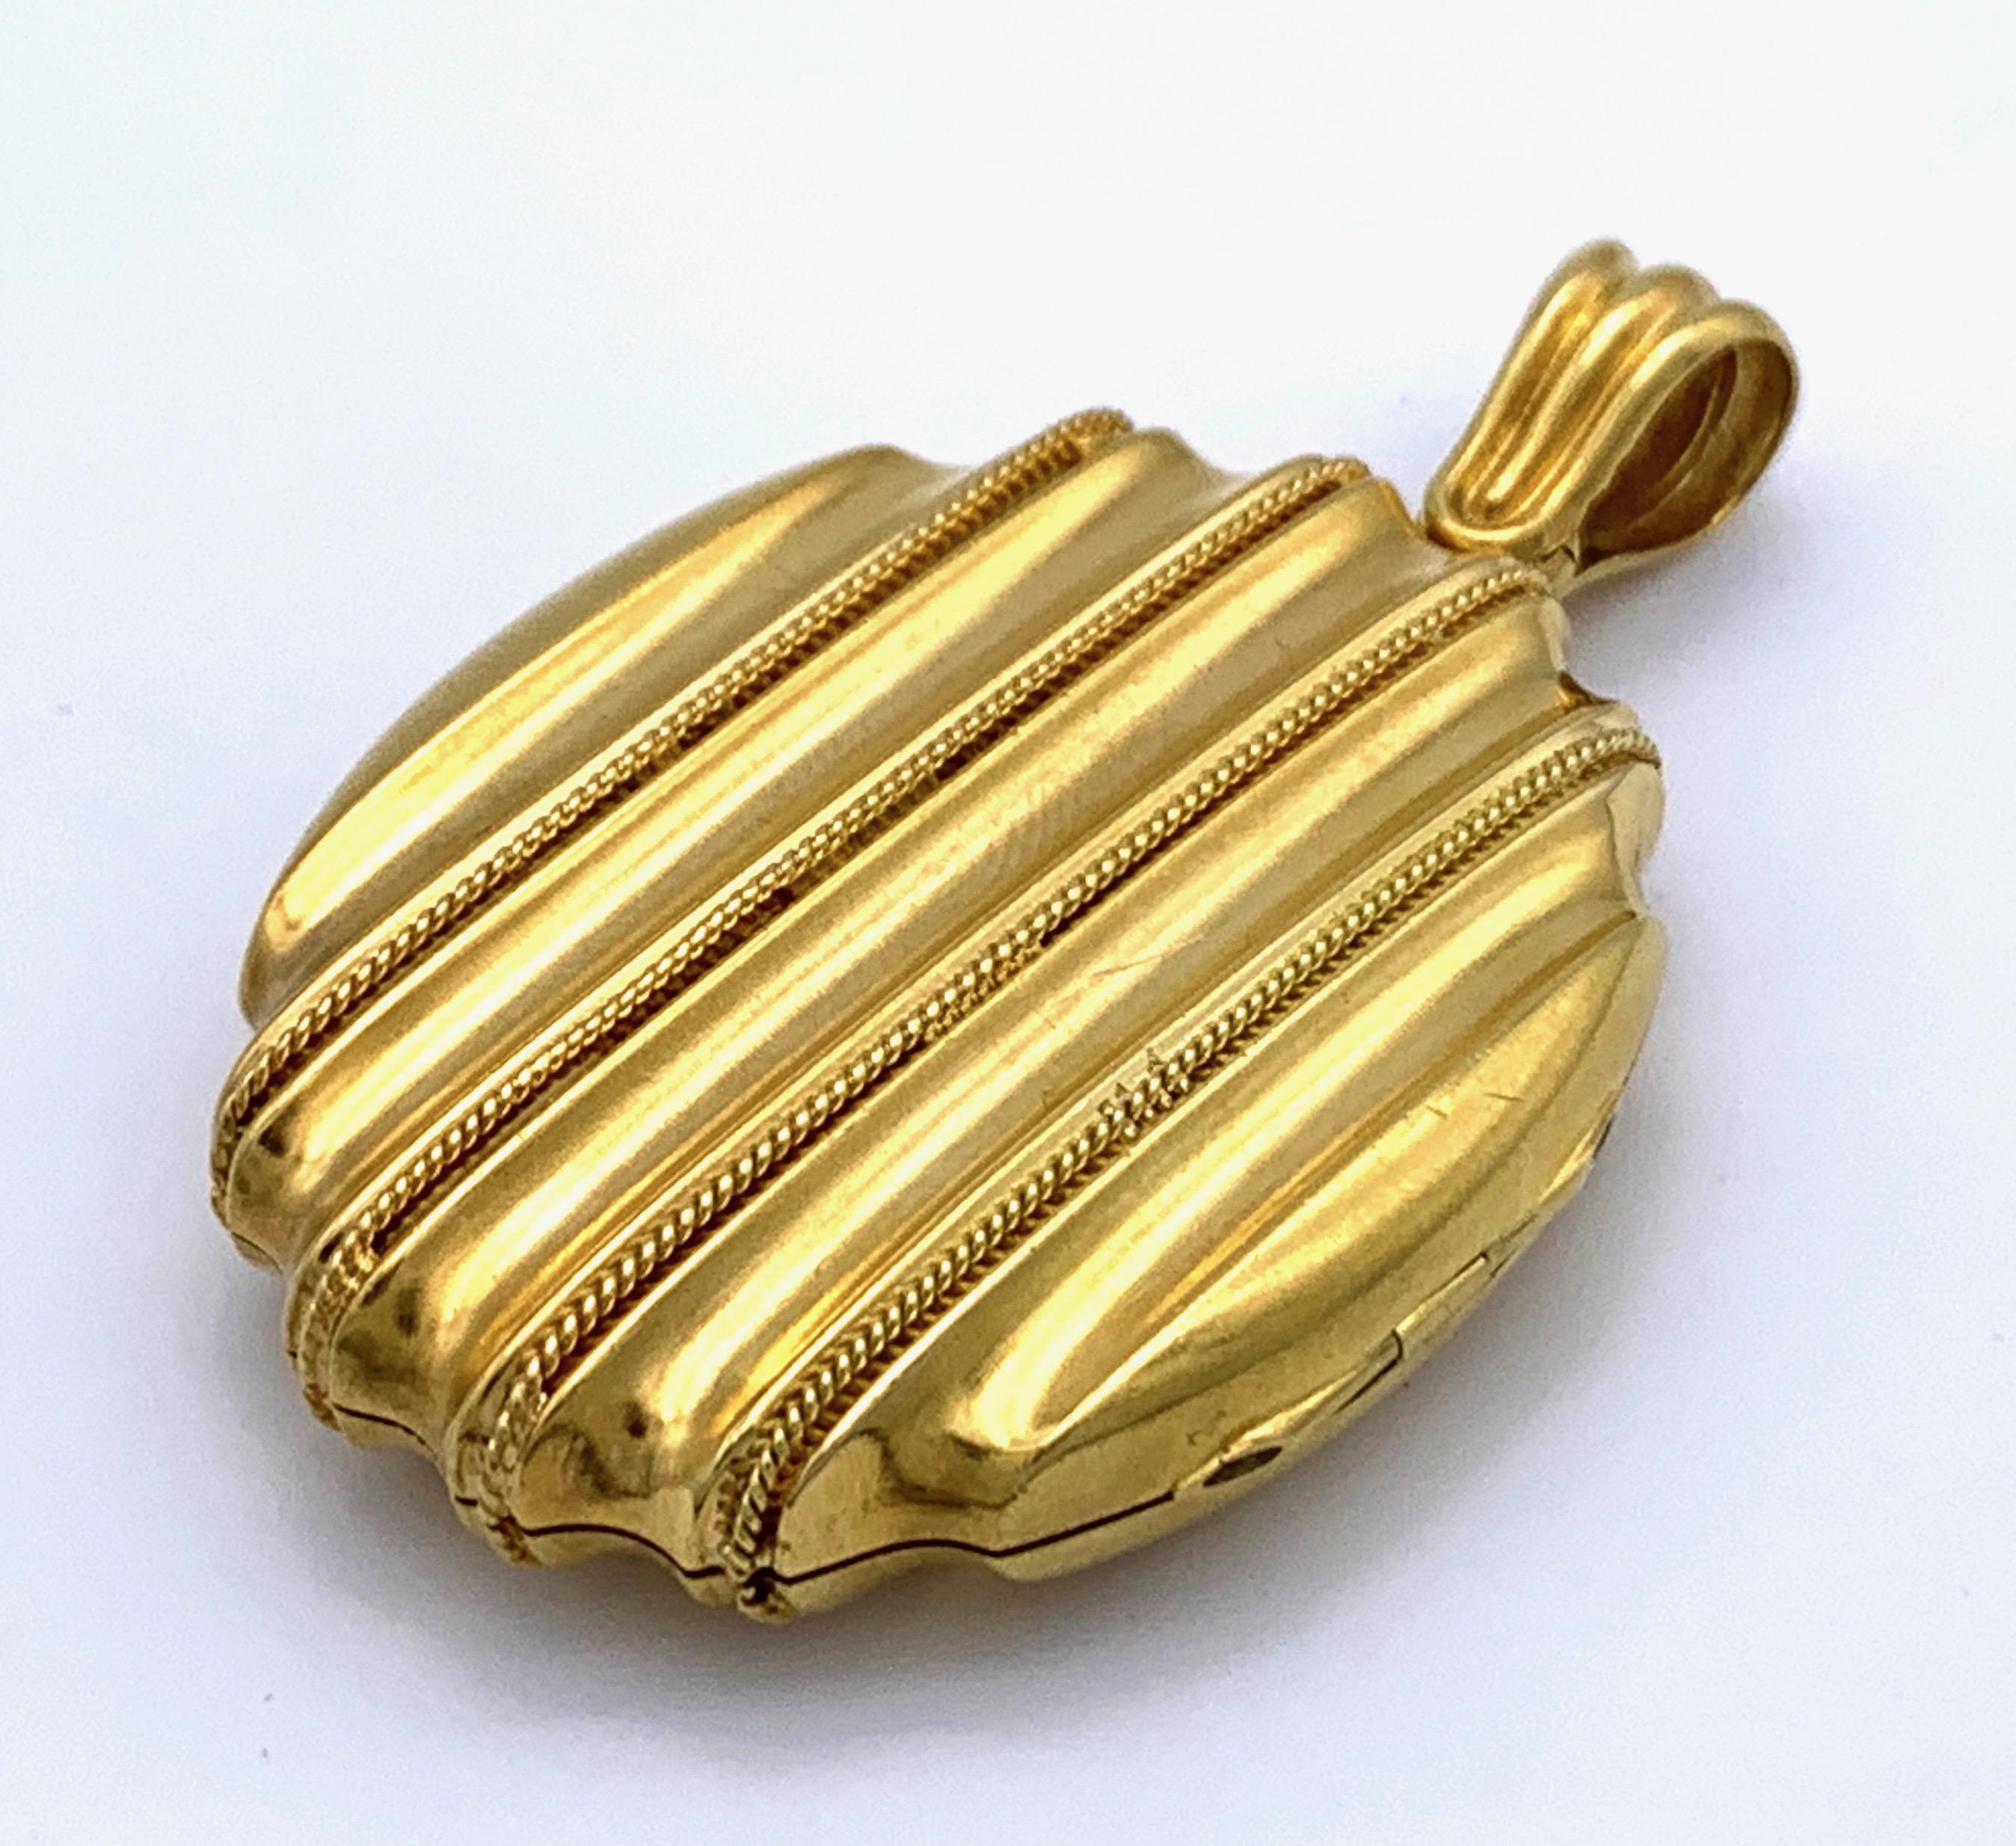 The oval locket is made out of two-coloured 15K gold and decorated with twisted gold wire. On the inside are the original gold frames. 
This chunky locket is a fine example of Victorian modernist design. 